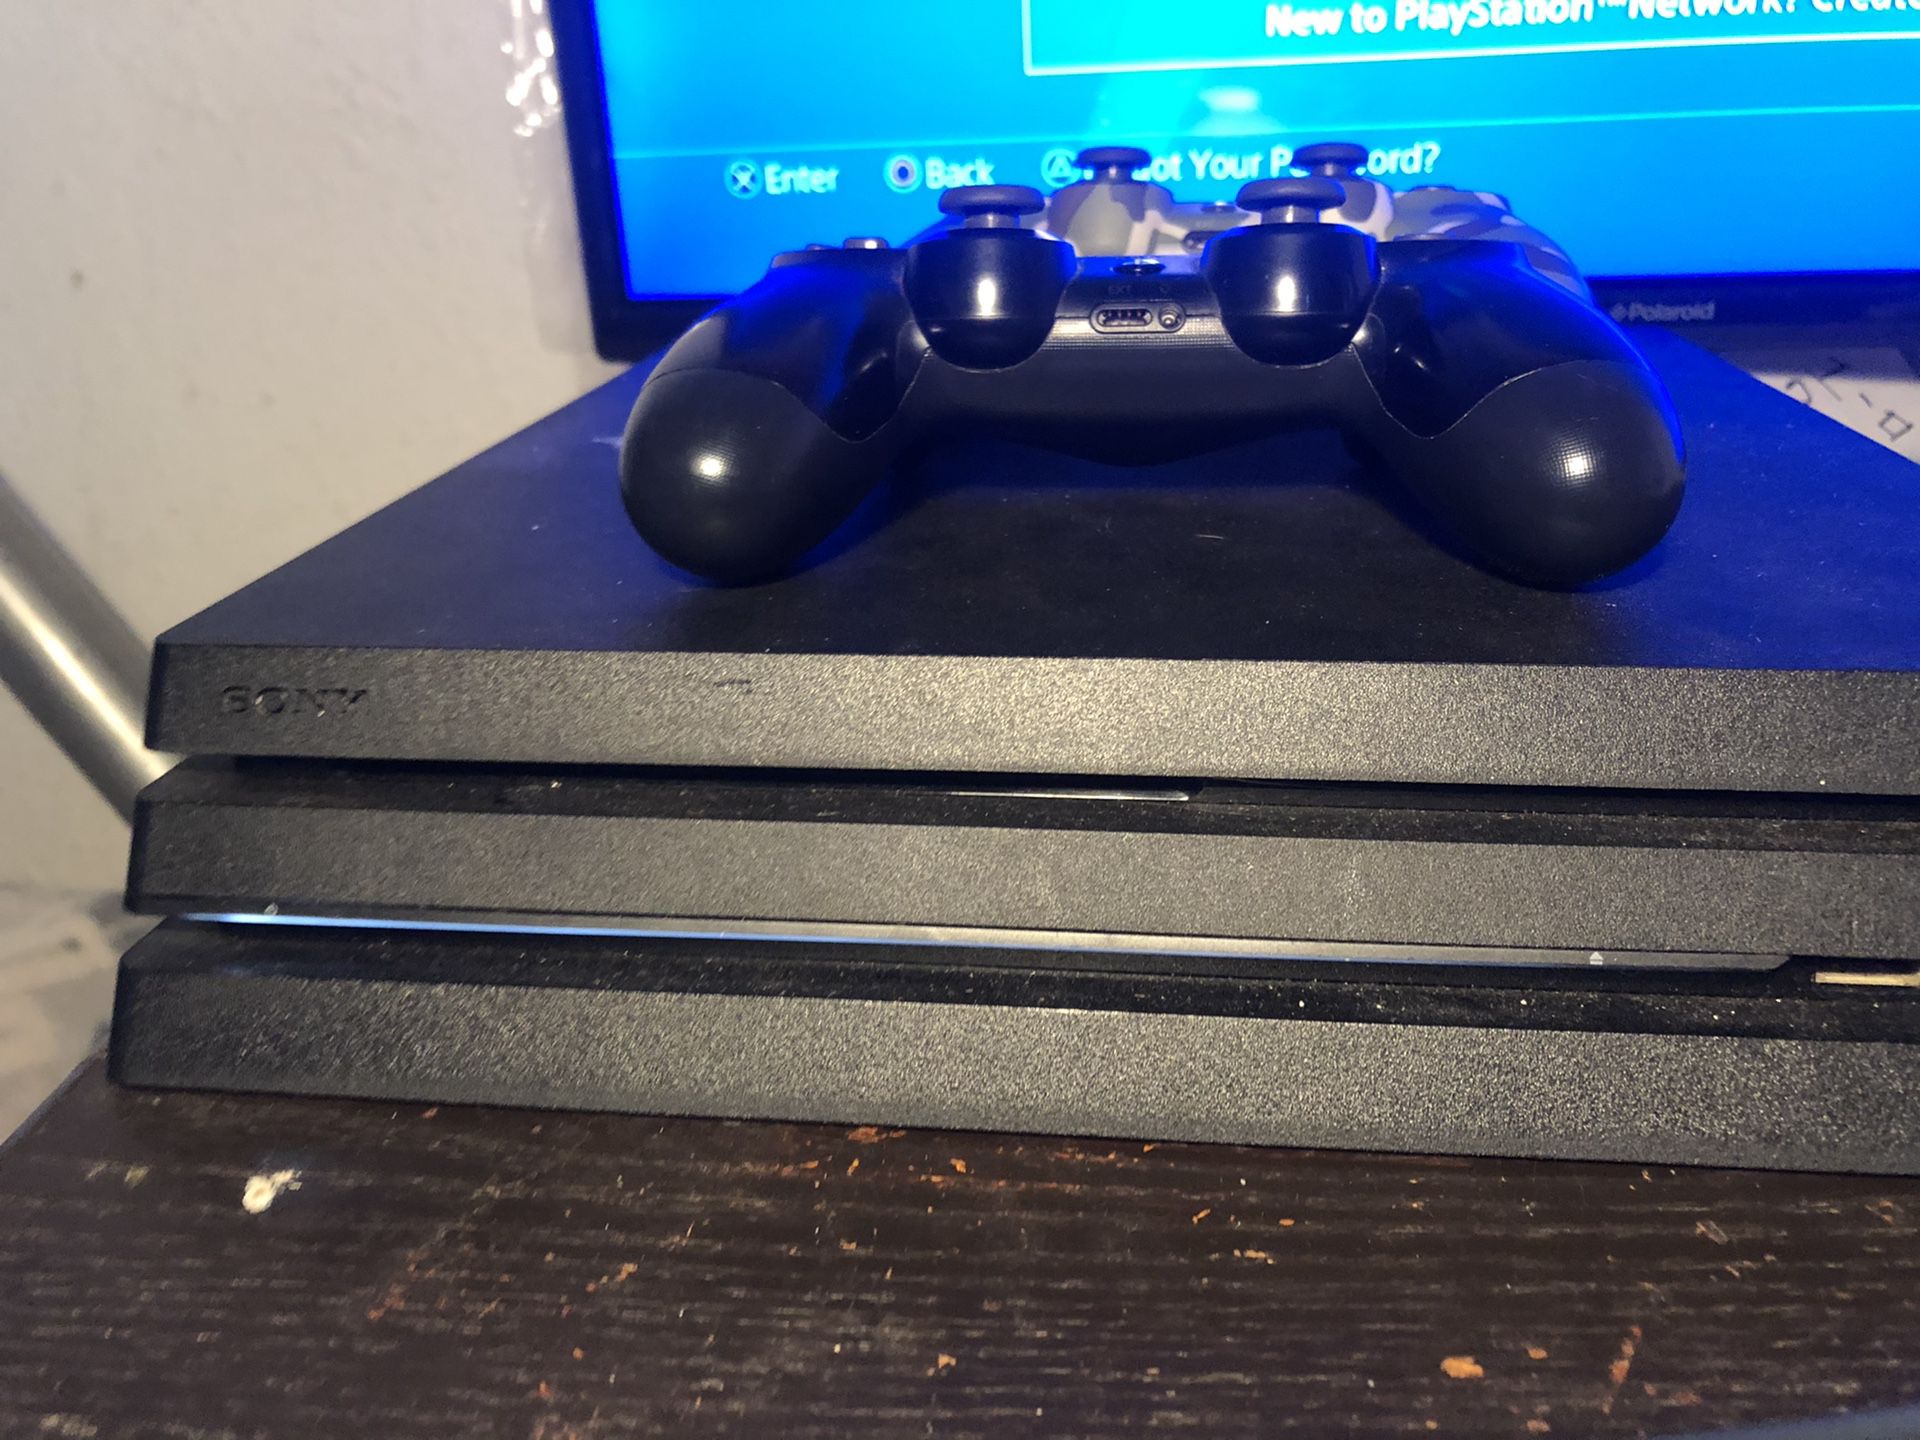 Ps4 pro with 11 games, 2 controllers, with headset